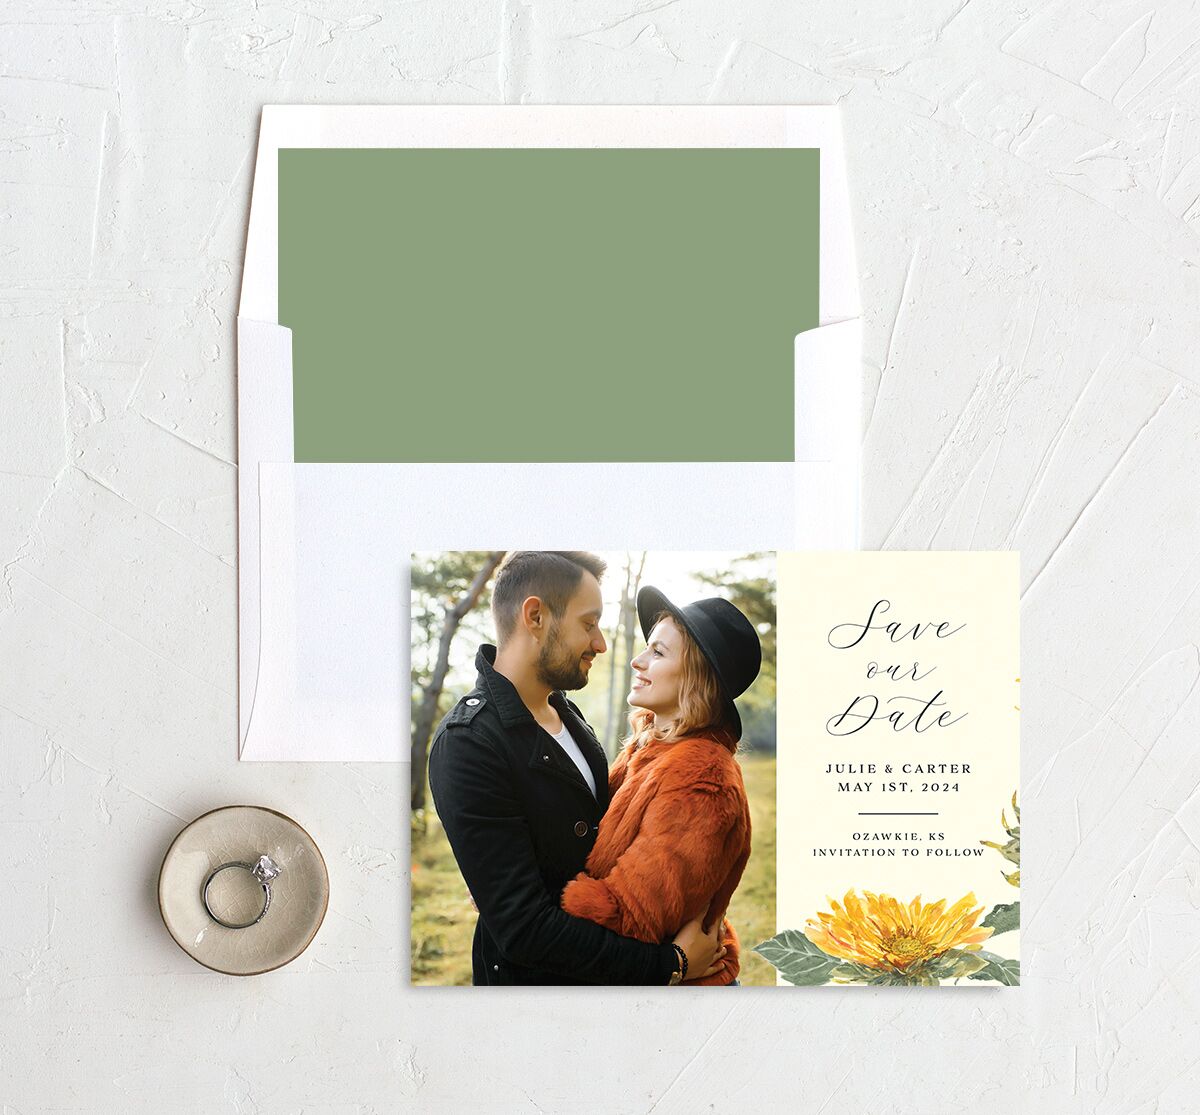 Rustic Floral Save the Date Cards envelope-and-liner in Lemon